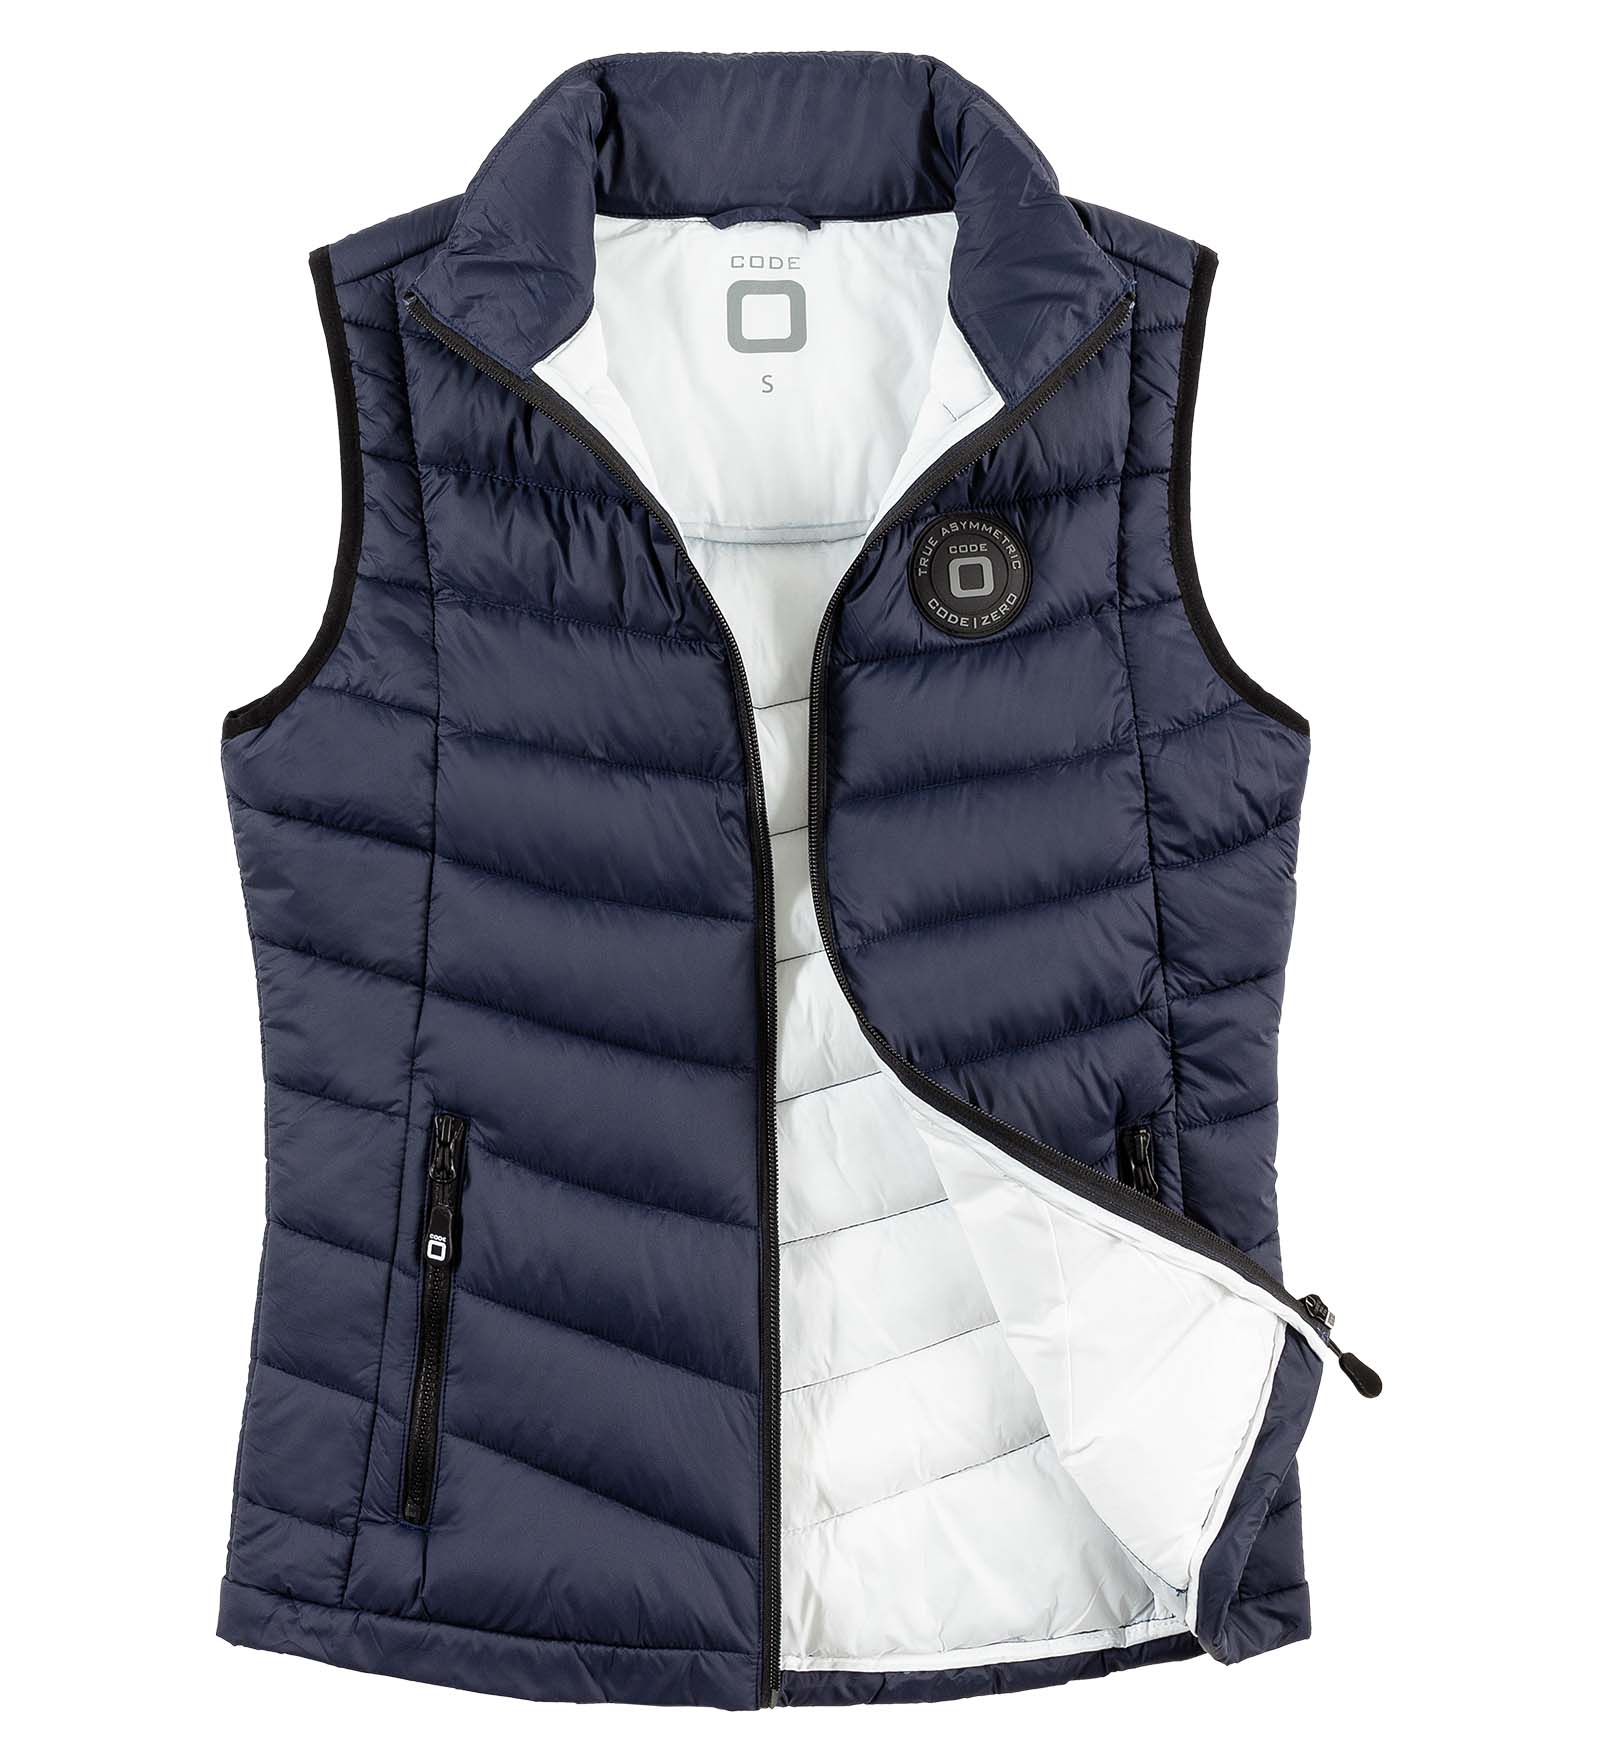 Quilted body warmer with padding - navy